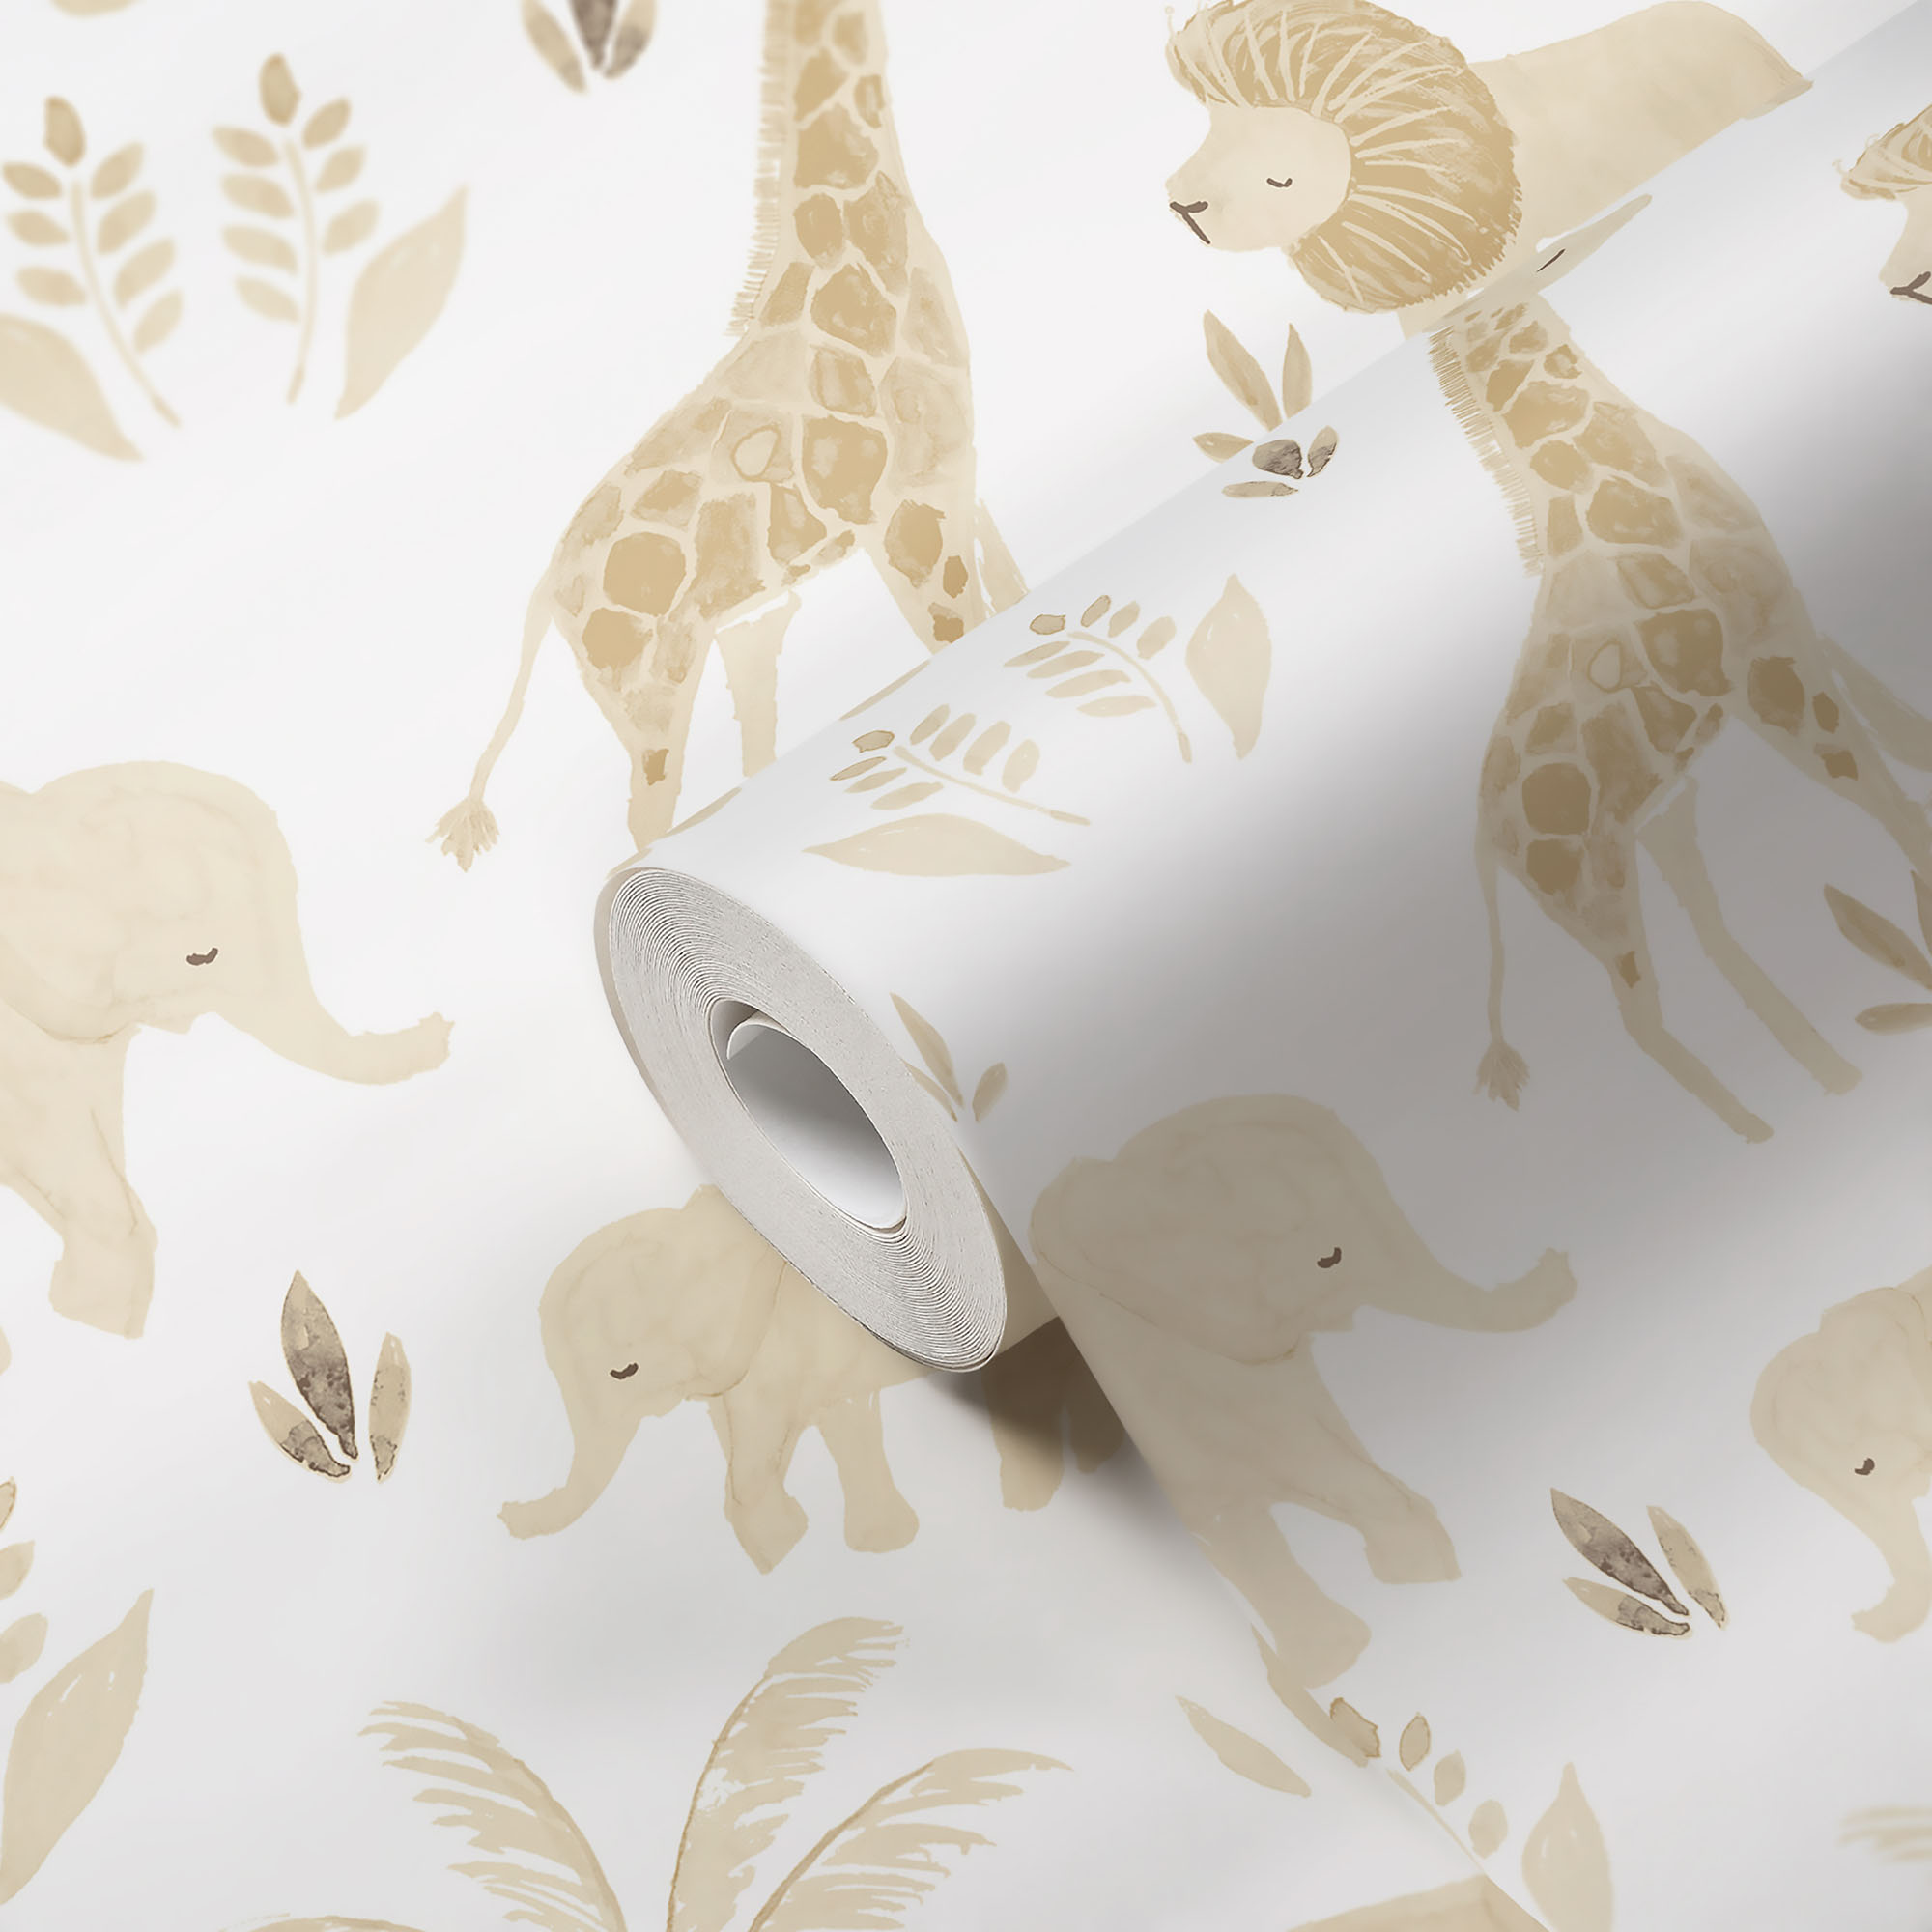 Crane baby wallpaper shown in nursery setting to demonstrate usage